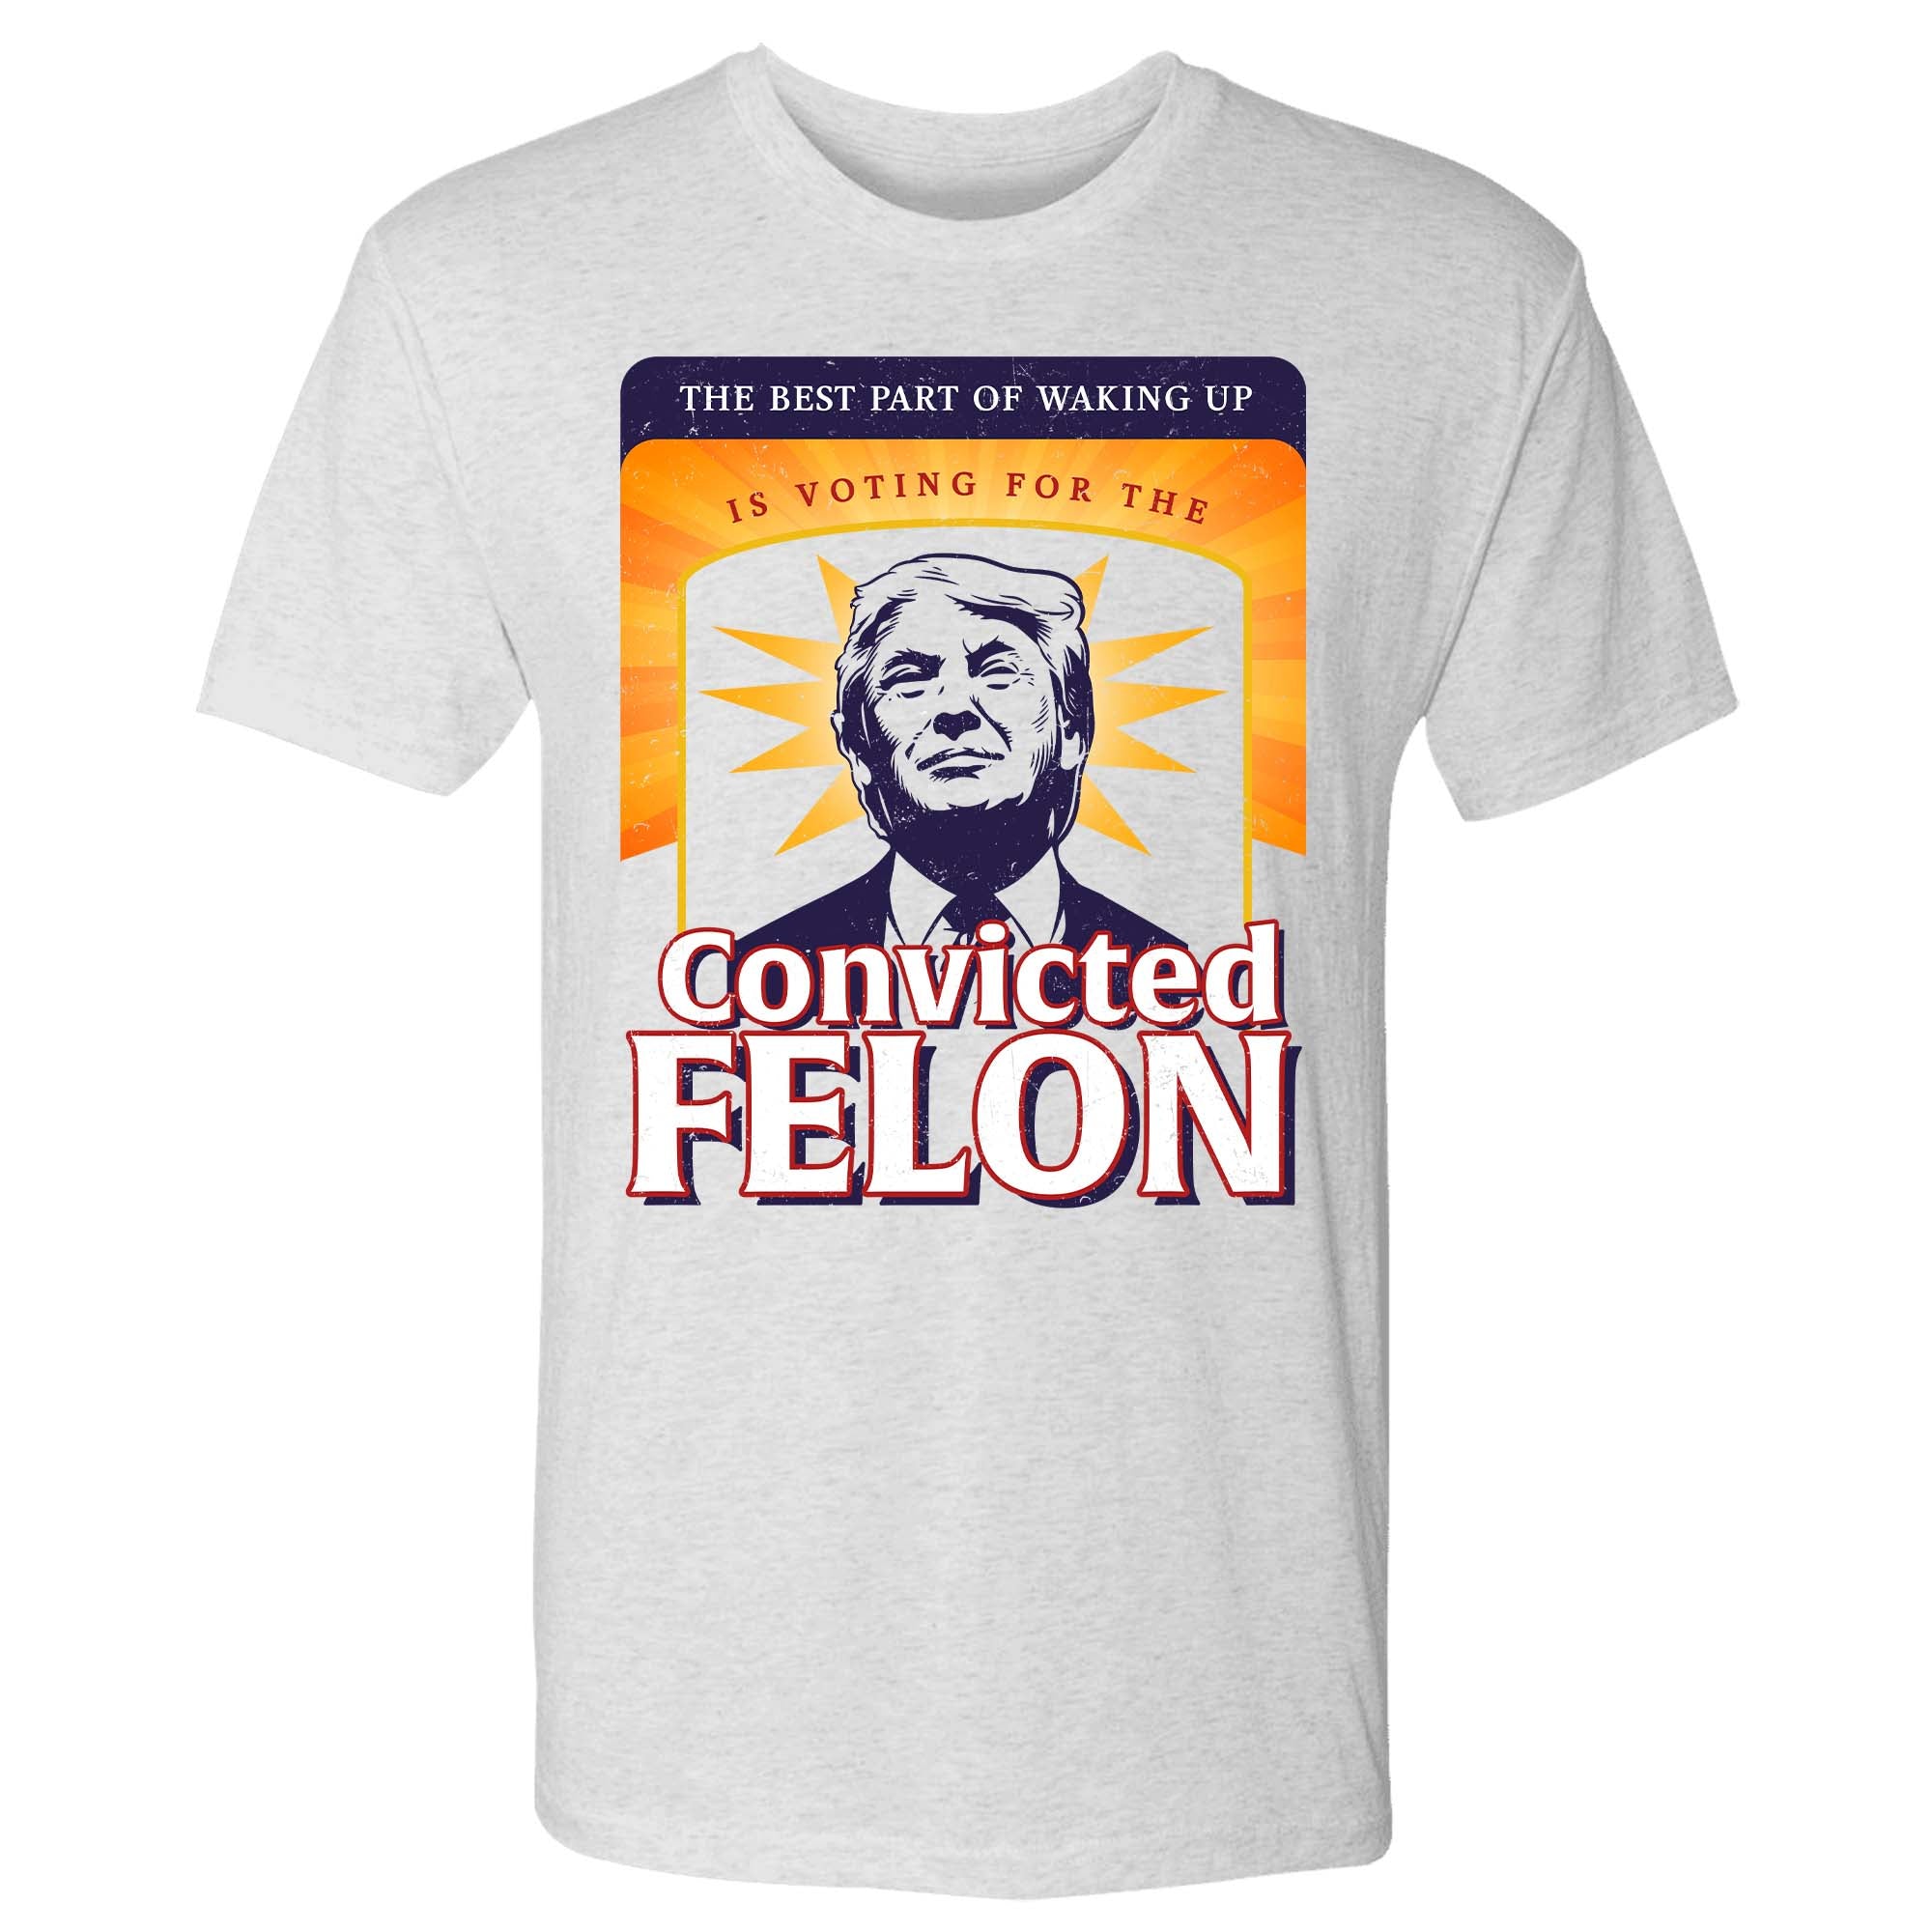 Voting For The Convicted Felon T-Shirt - GB86